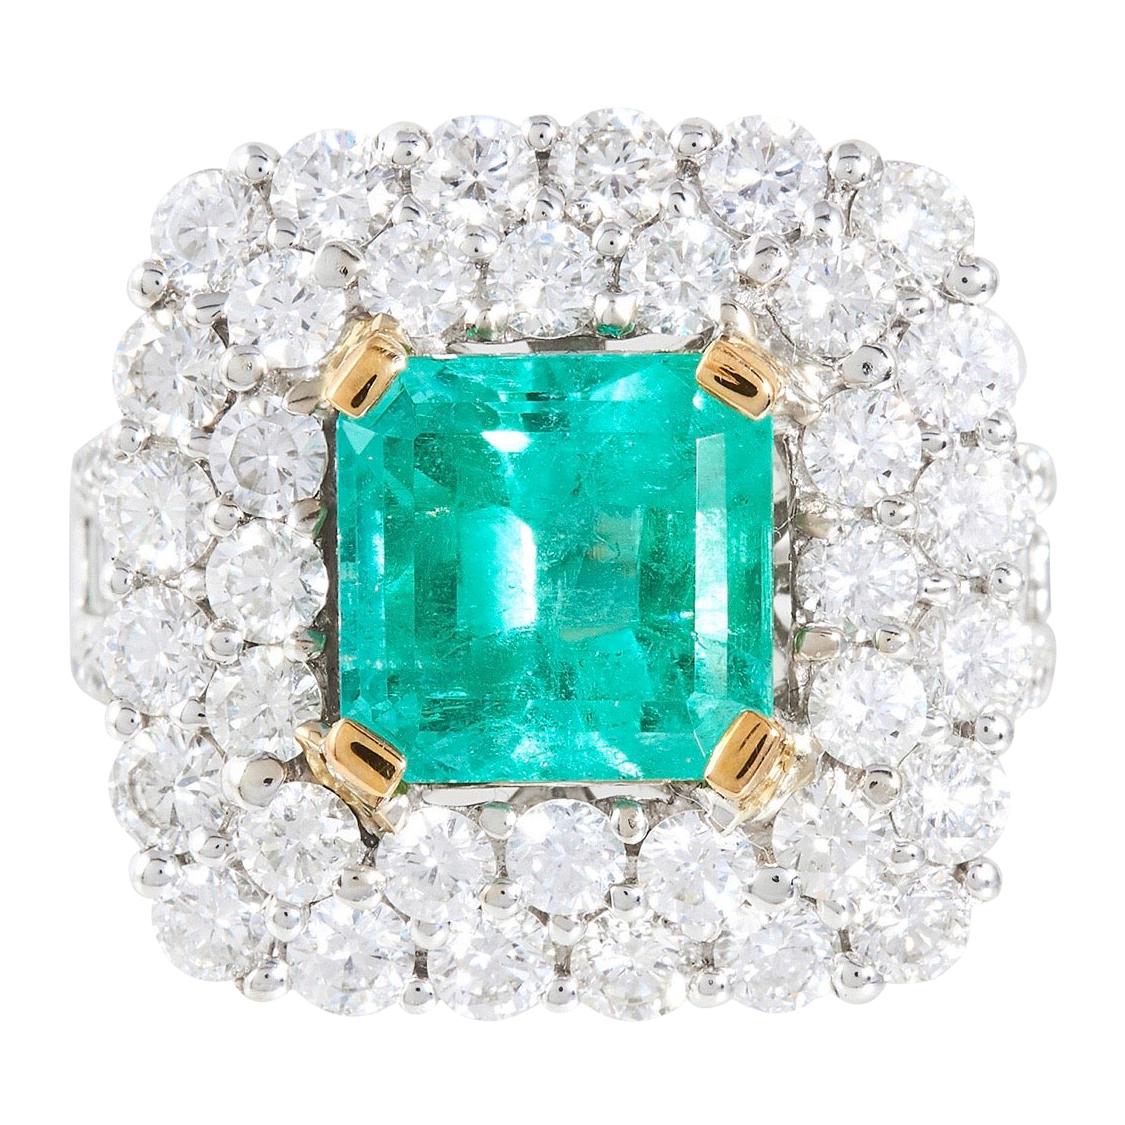 4.88 Ct Colombian Emerald 5.03 Ct Diamond Dress Ring Set in 18 Karat White Gold For Sale